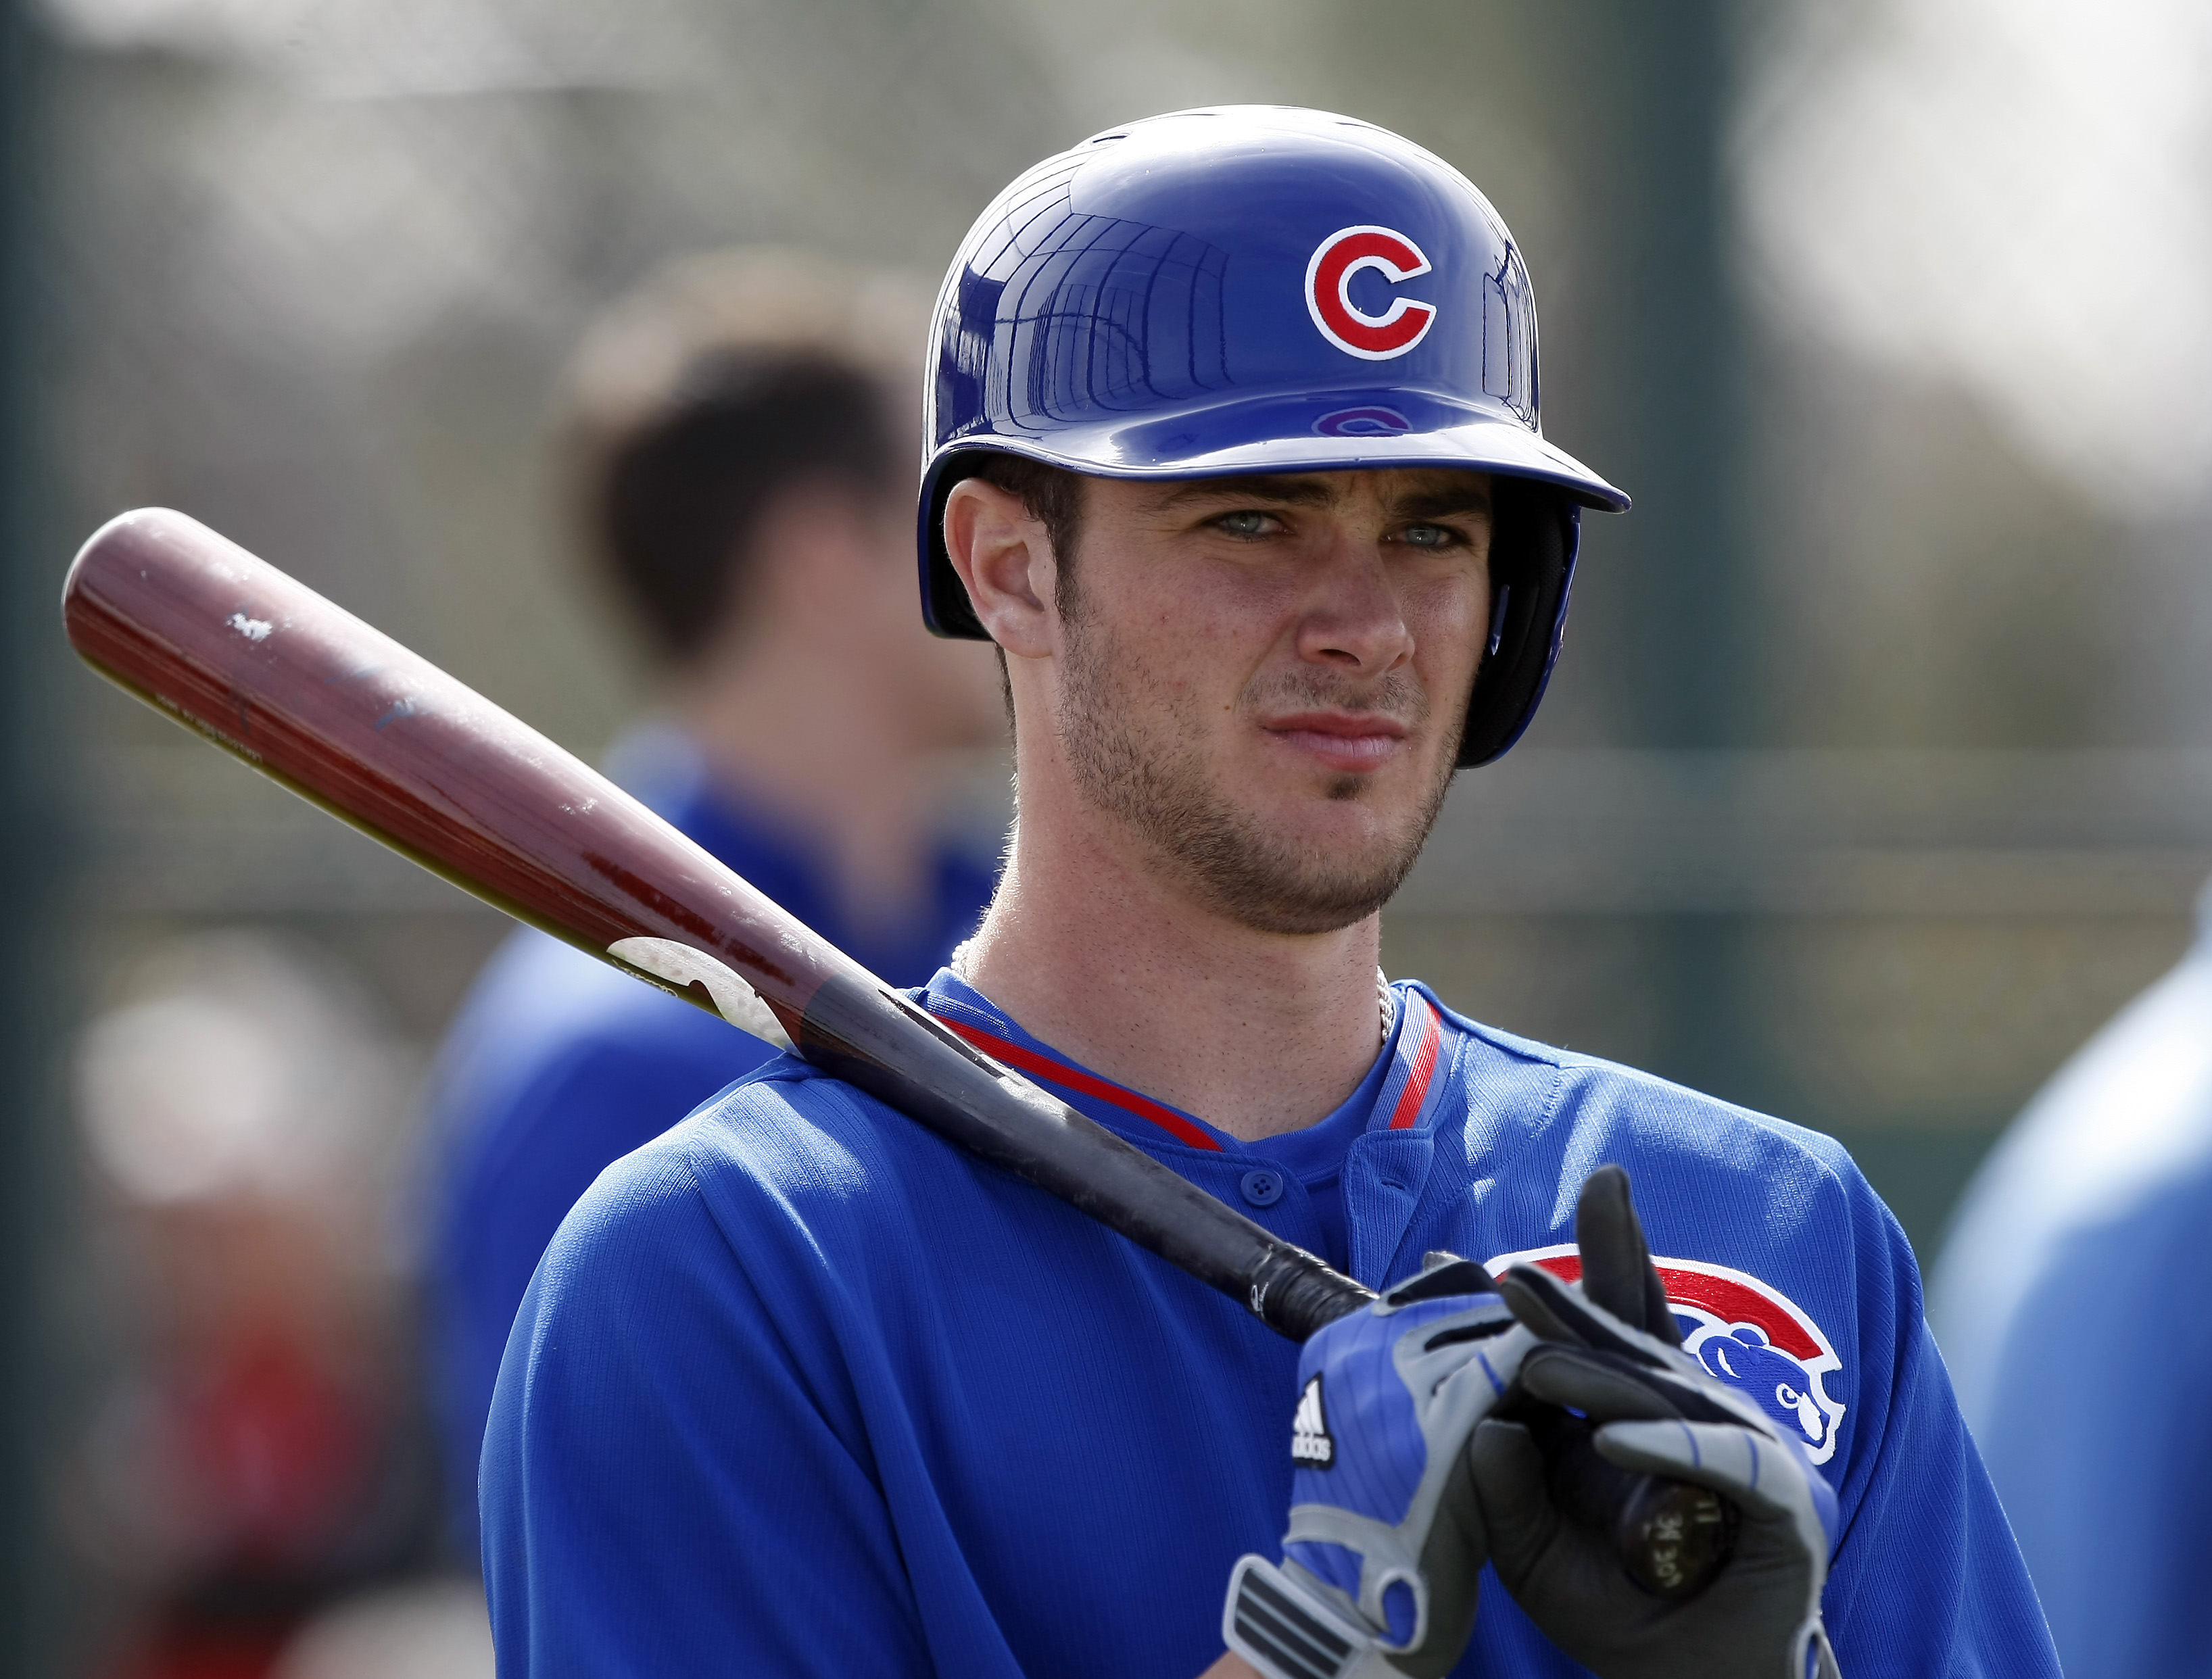 He was supposed to be the savior': How Kris Bryant made living up to the  hype look so easy - The Athletic